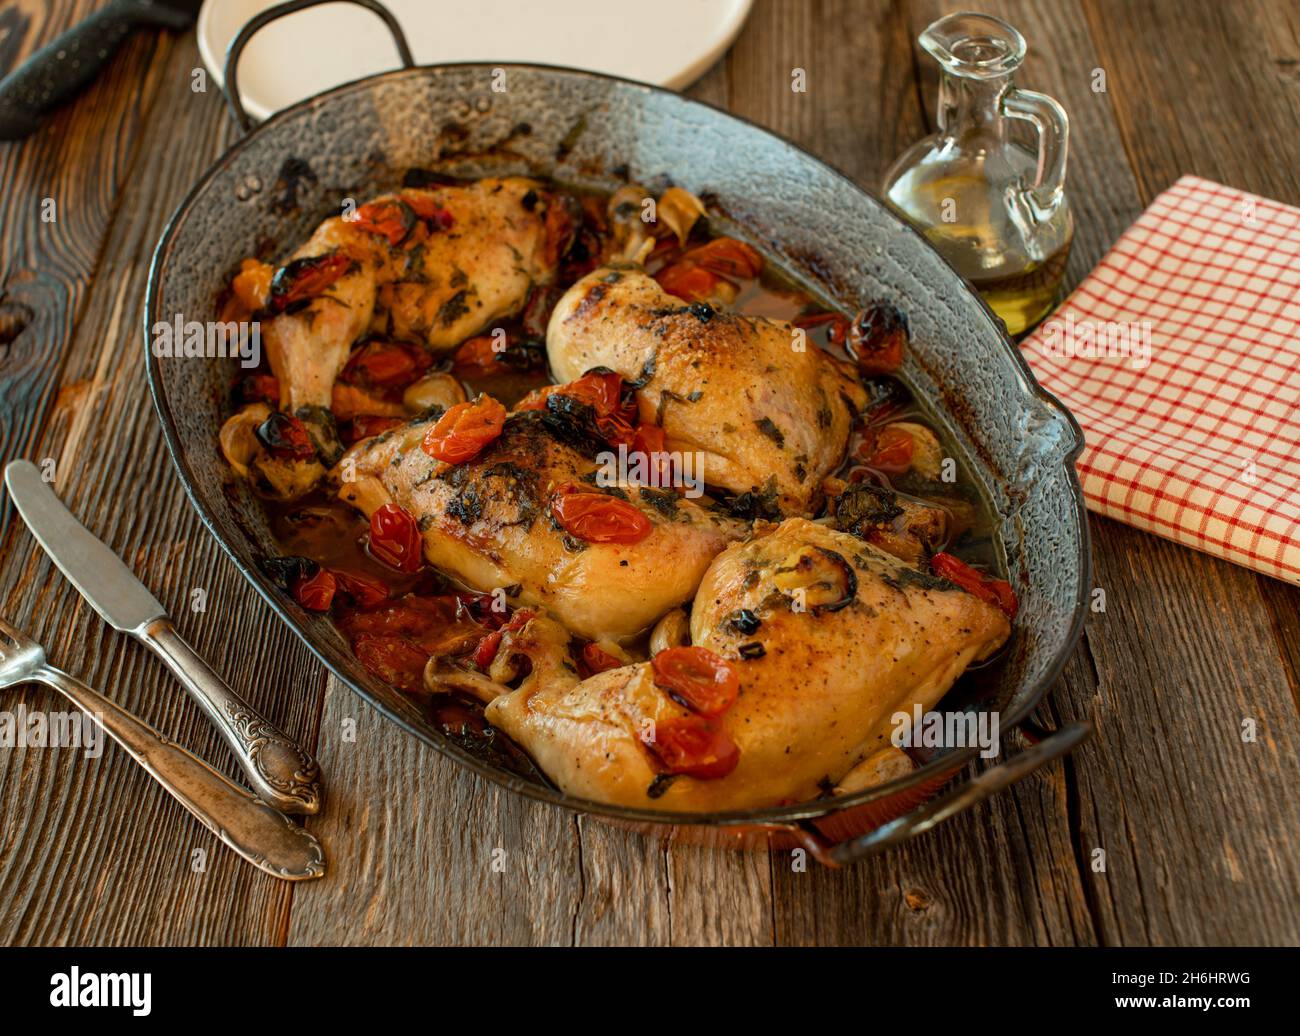 rustic chicken dish with vegetables served in a old fashioned roasting pan on wooden table Stock Photo